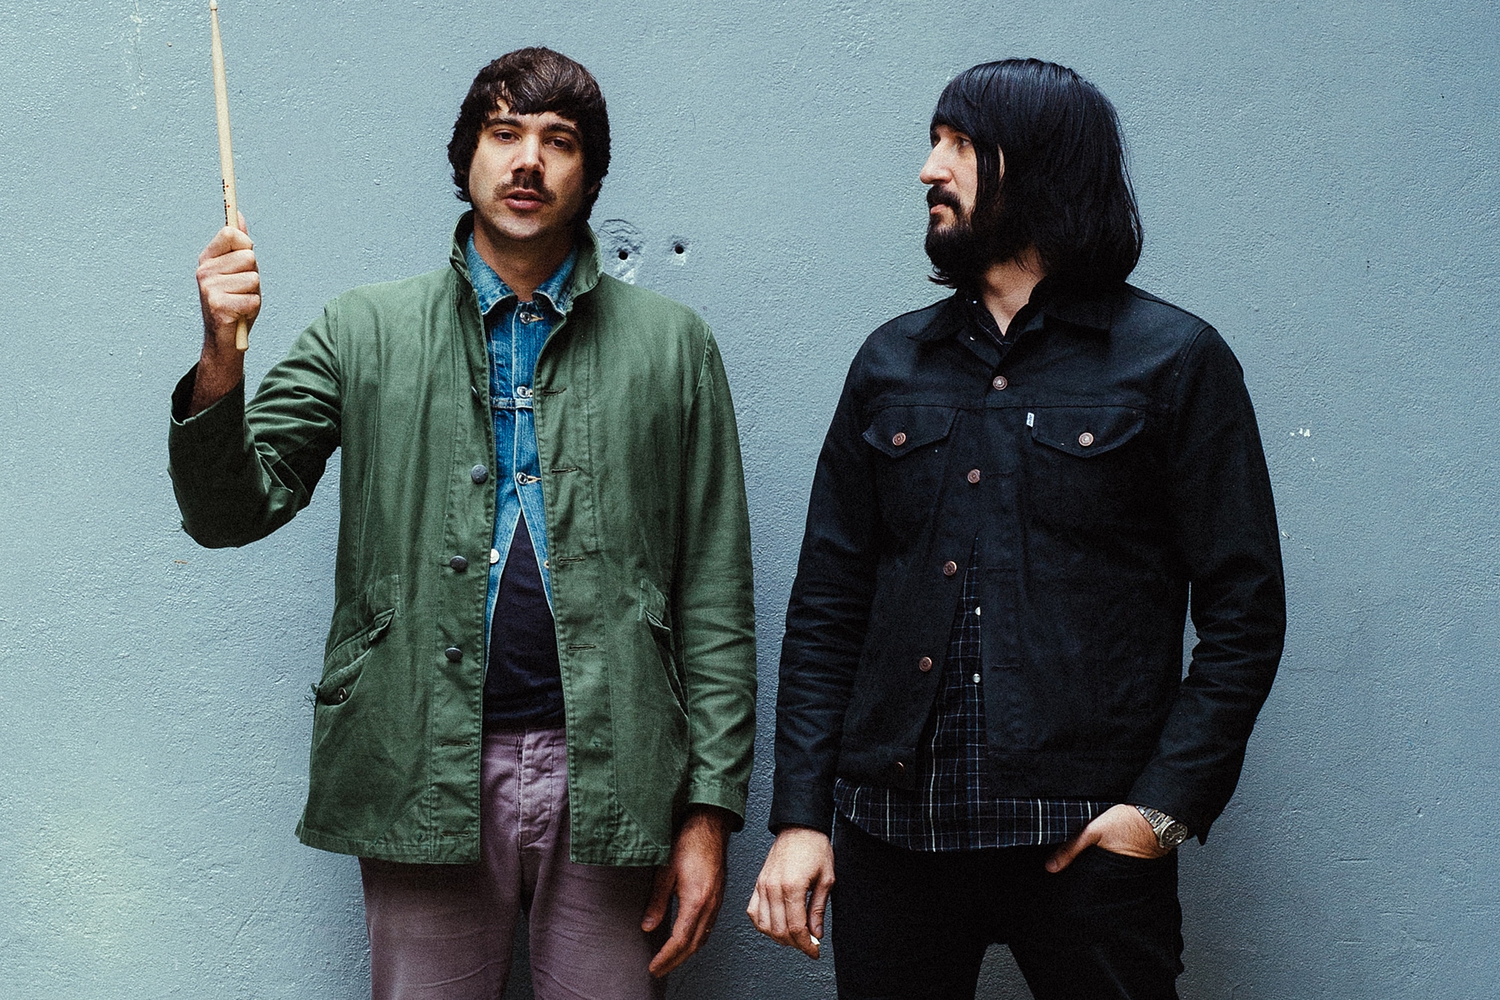 Death From Above 1979 postpone US tour dates, cite visa issues